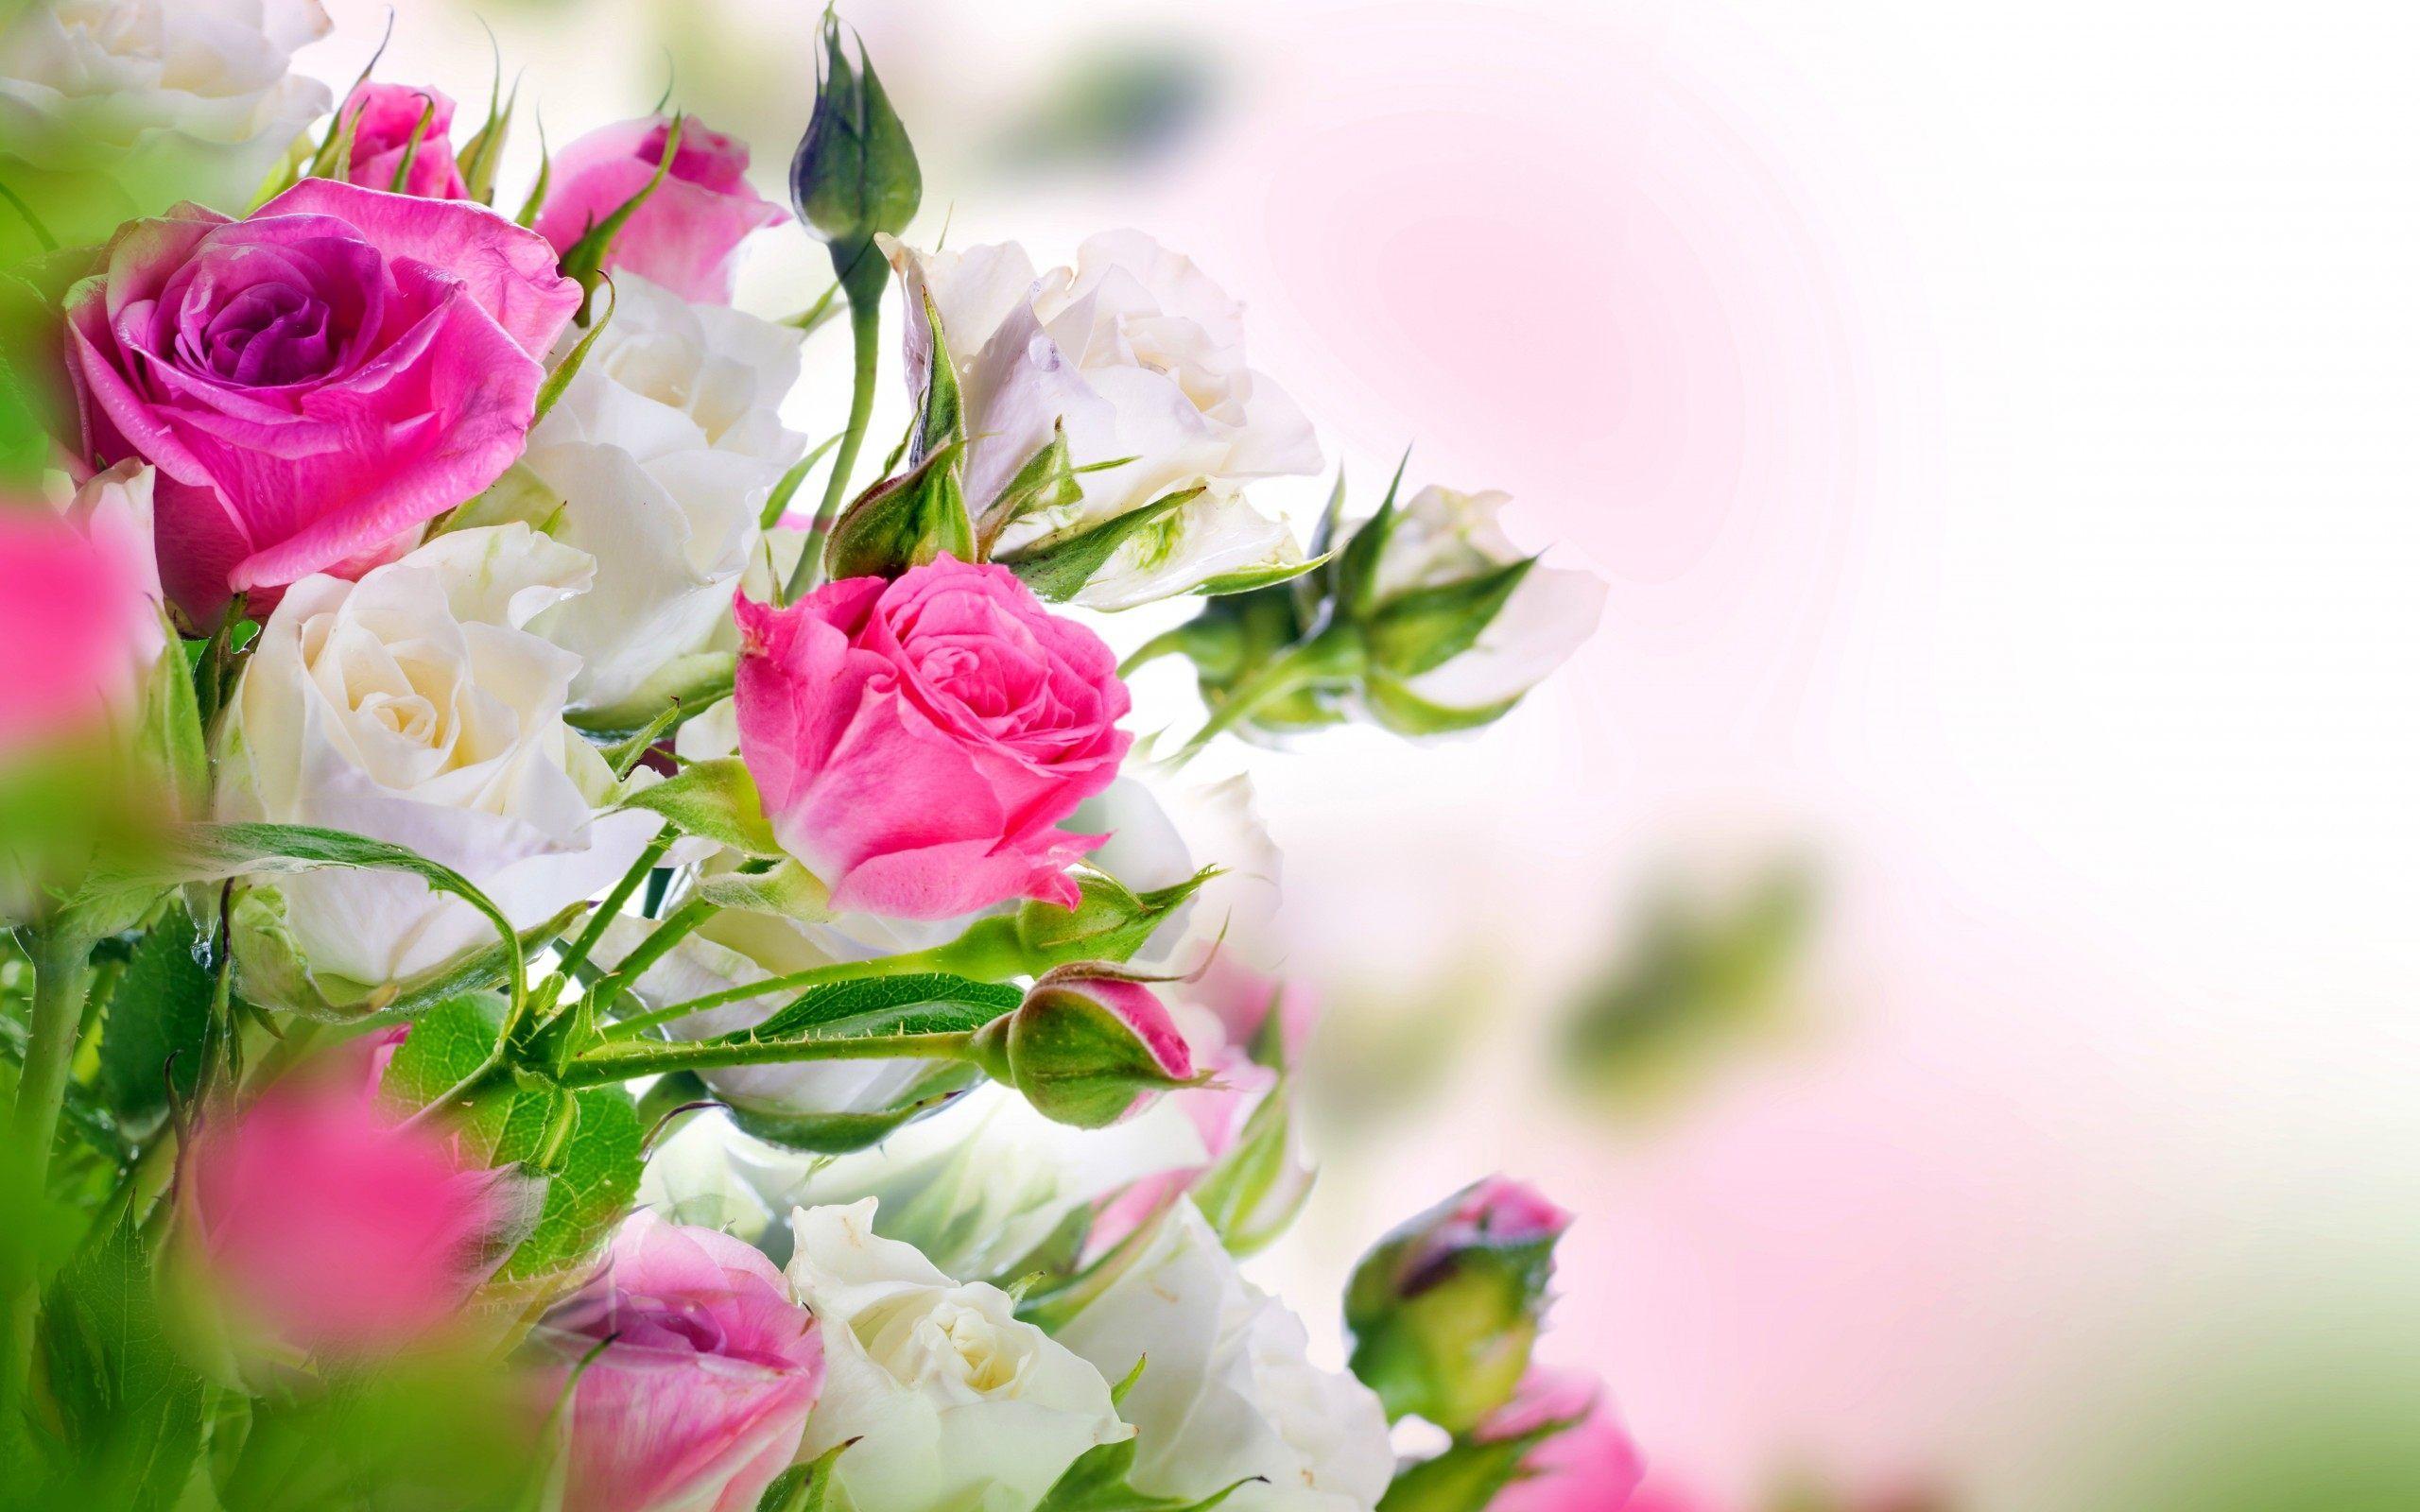 Full HD Of Pink And White Roses Wallpaper Best Image Field Rose